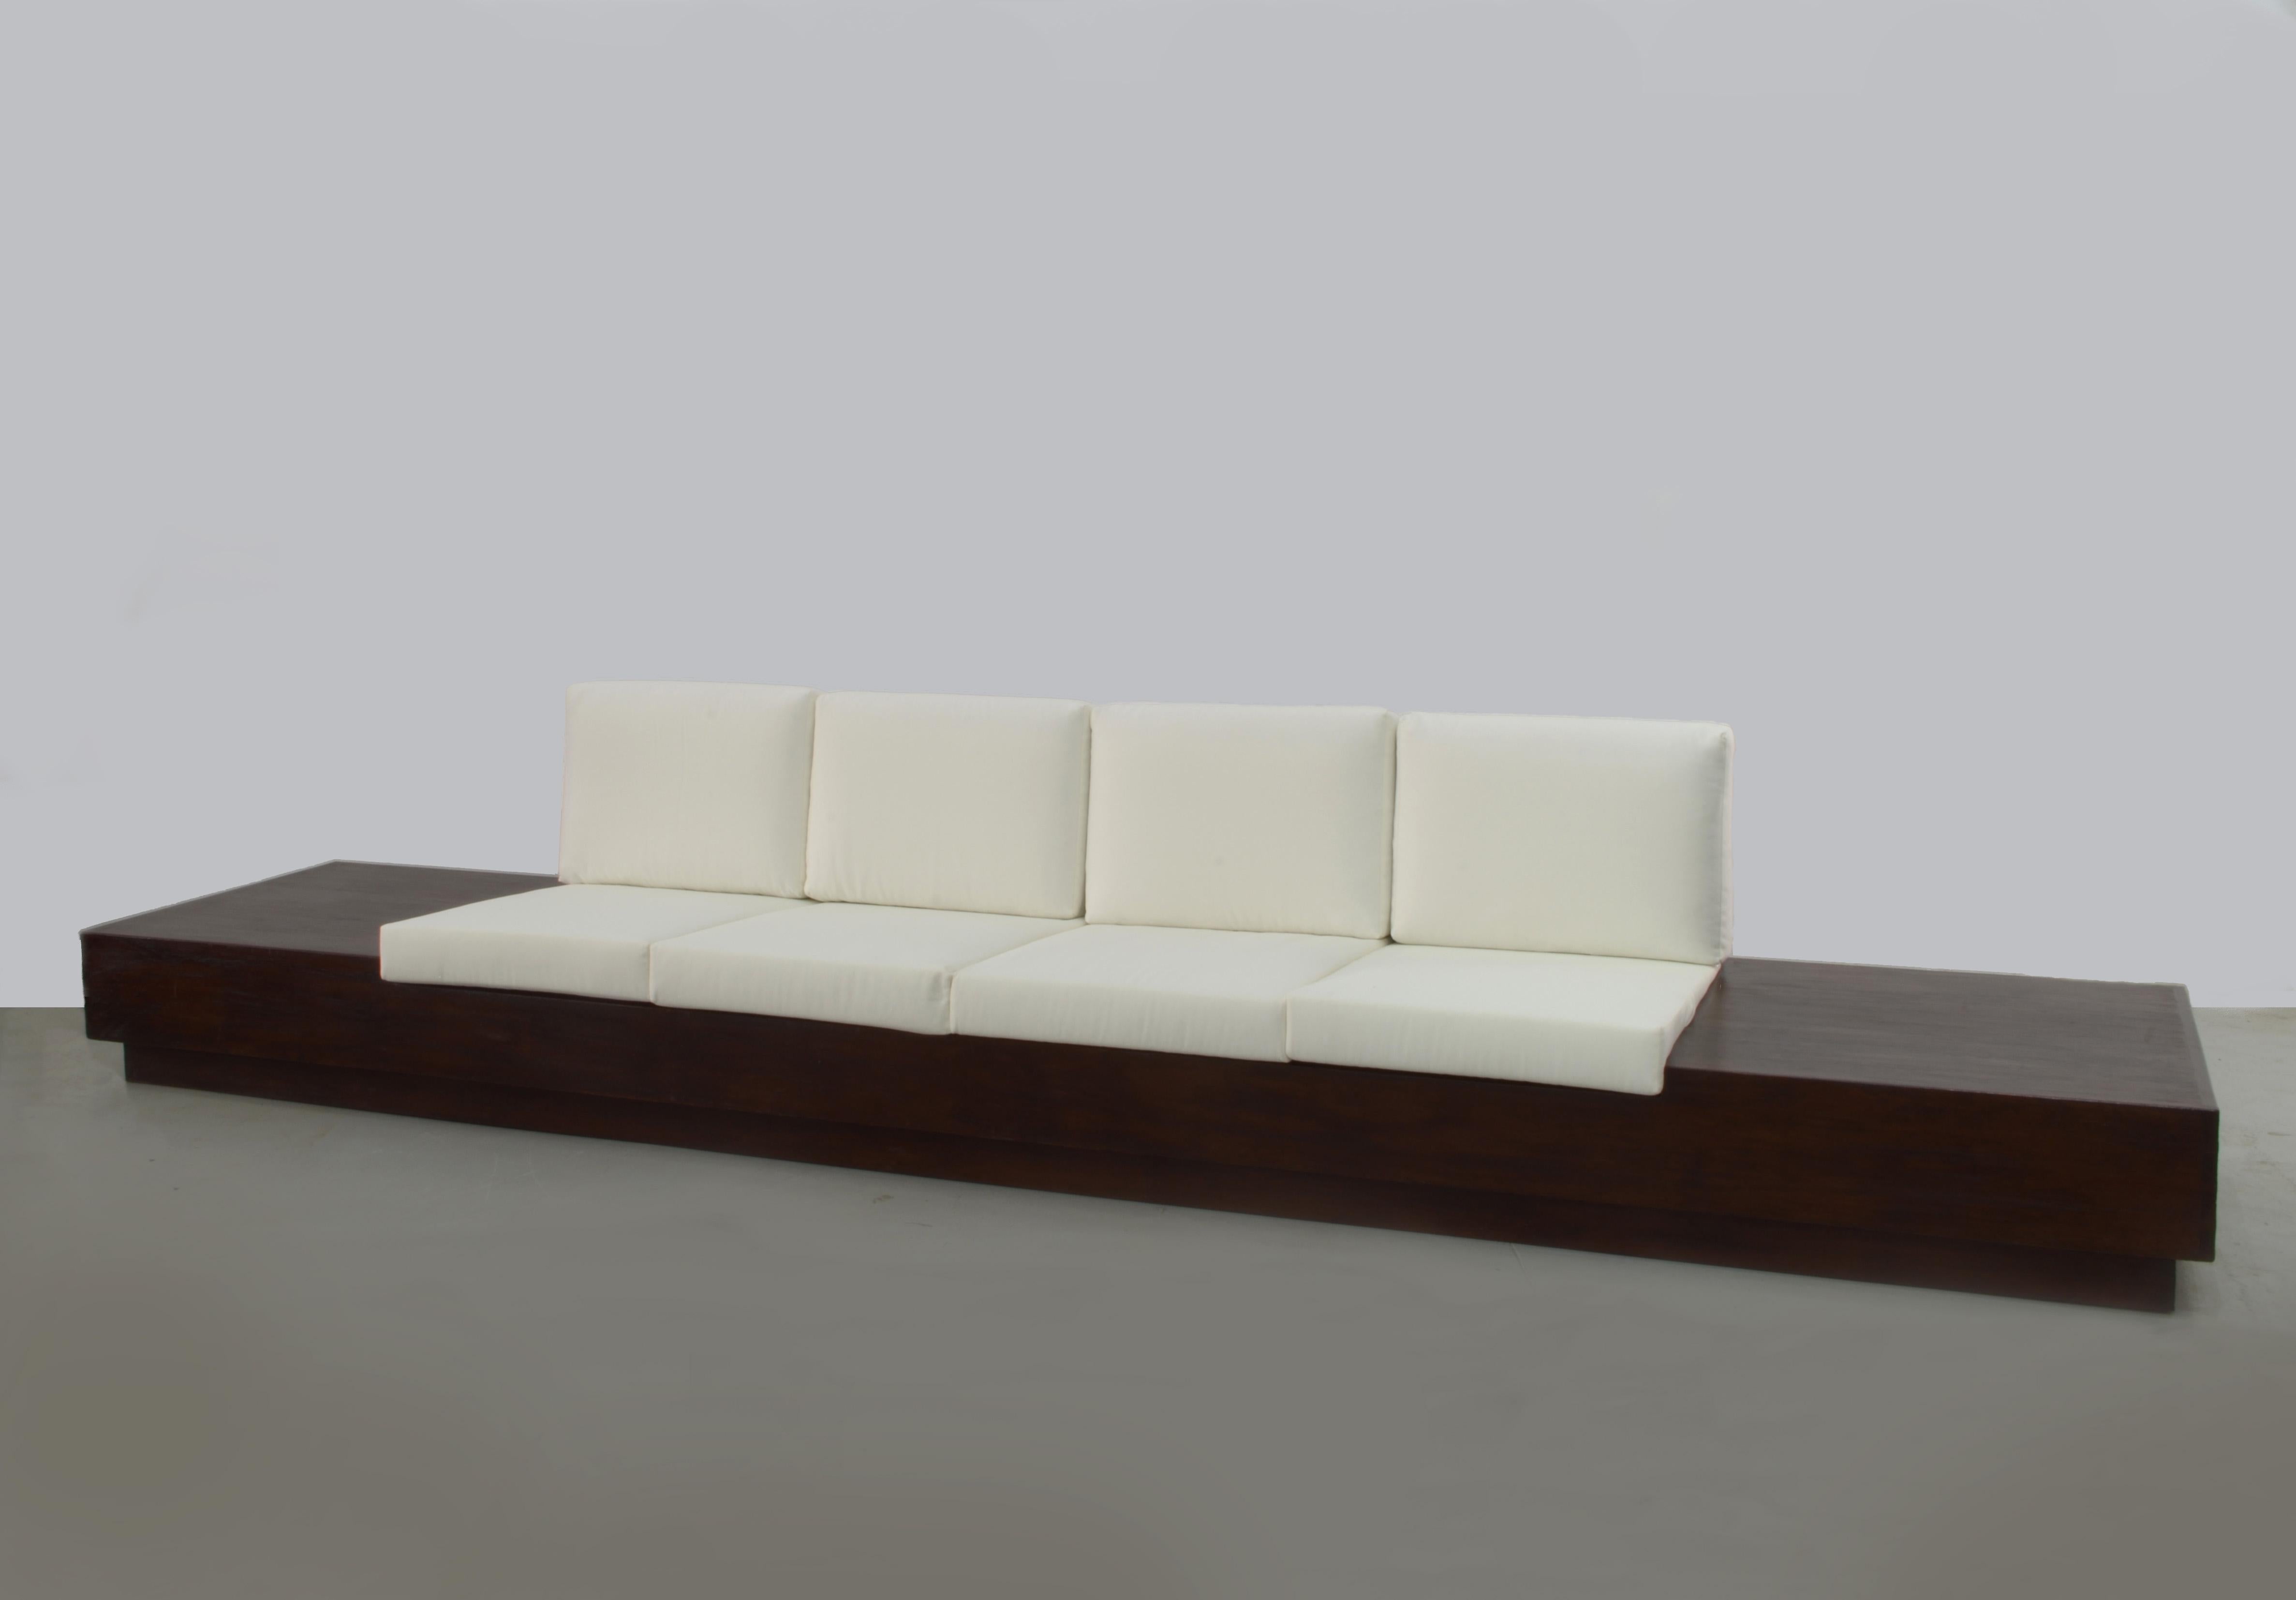 Extremely rare sofa by Joaquim Tenreiro. With 4 meters width, this elegant bench, made in solid cedar comfortably accommodates 4 people and has a side space that may be used as a side table. The piece has been completely restored. 

Tenreiro is